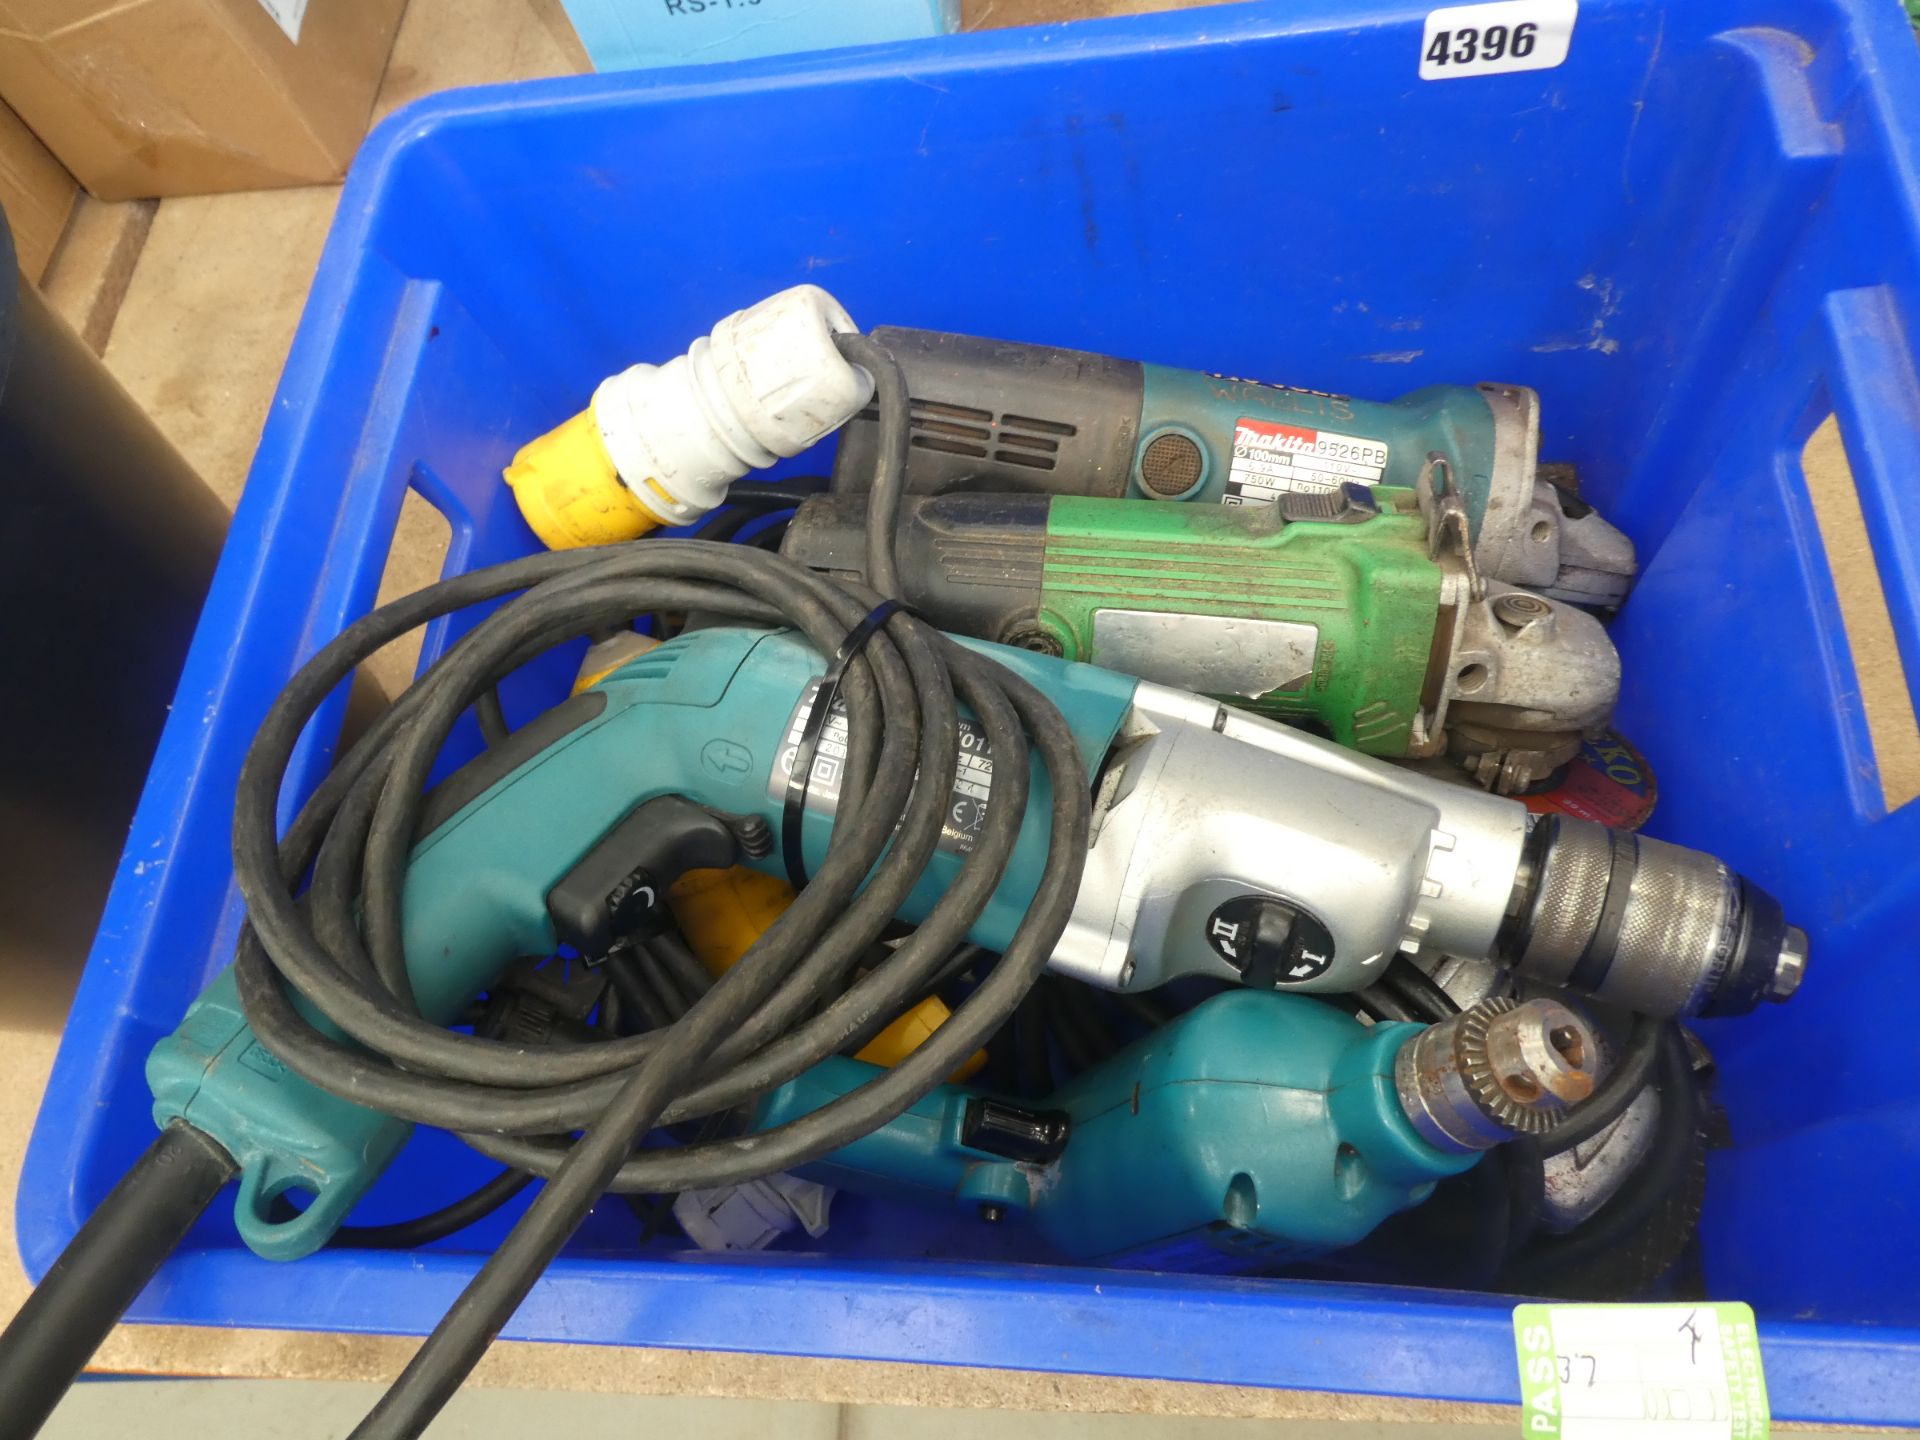 Blue box containing 110v drills and angle grinders